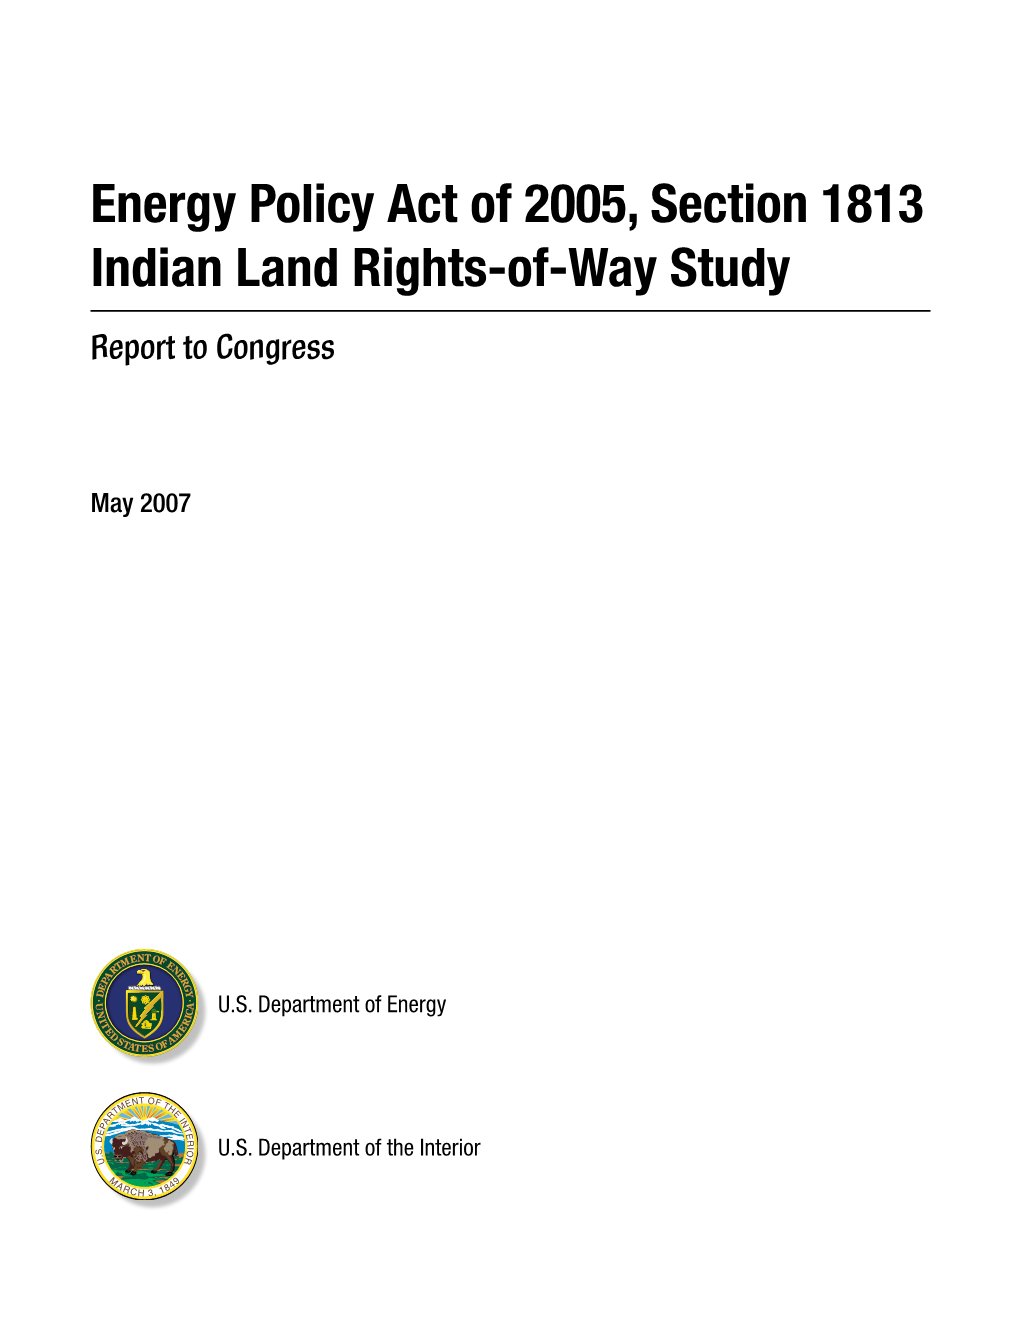 Energy Policy Act of 2005, Section 1813, Indian Land Rights-Of-Way